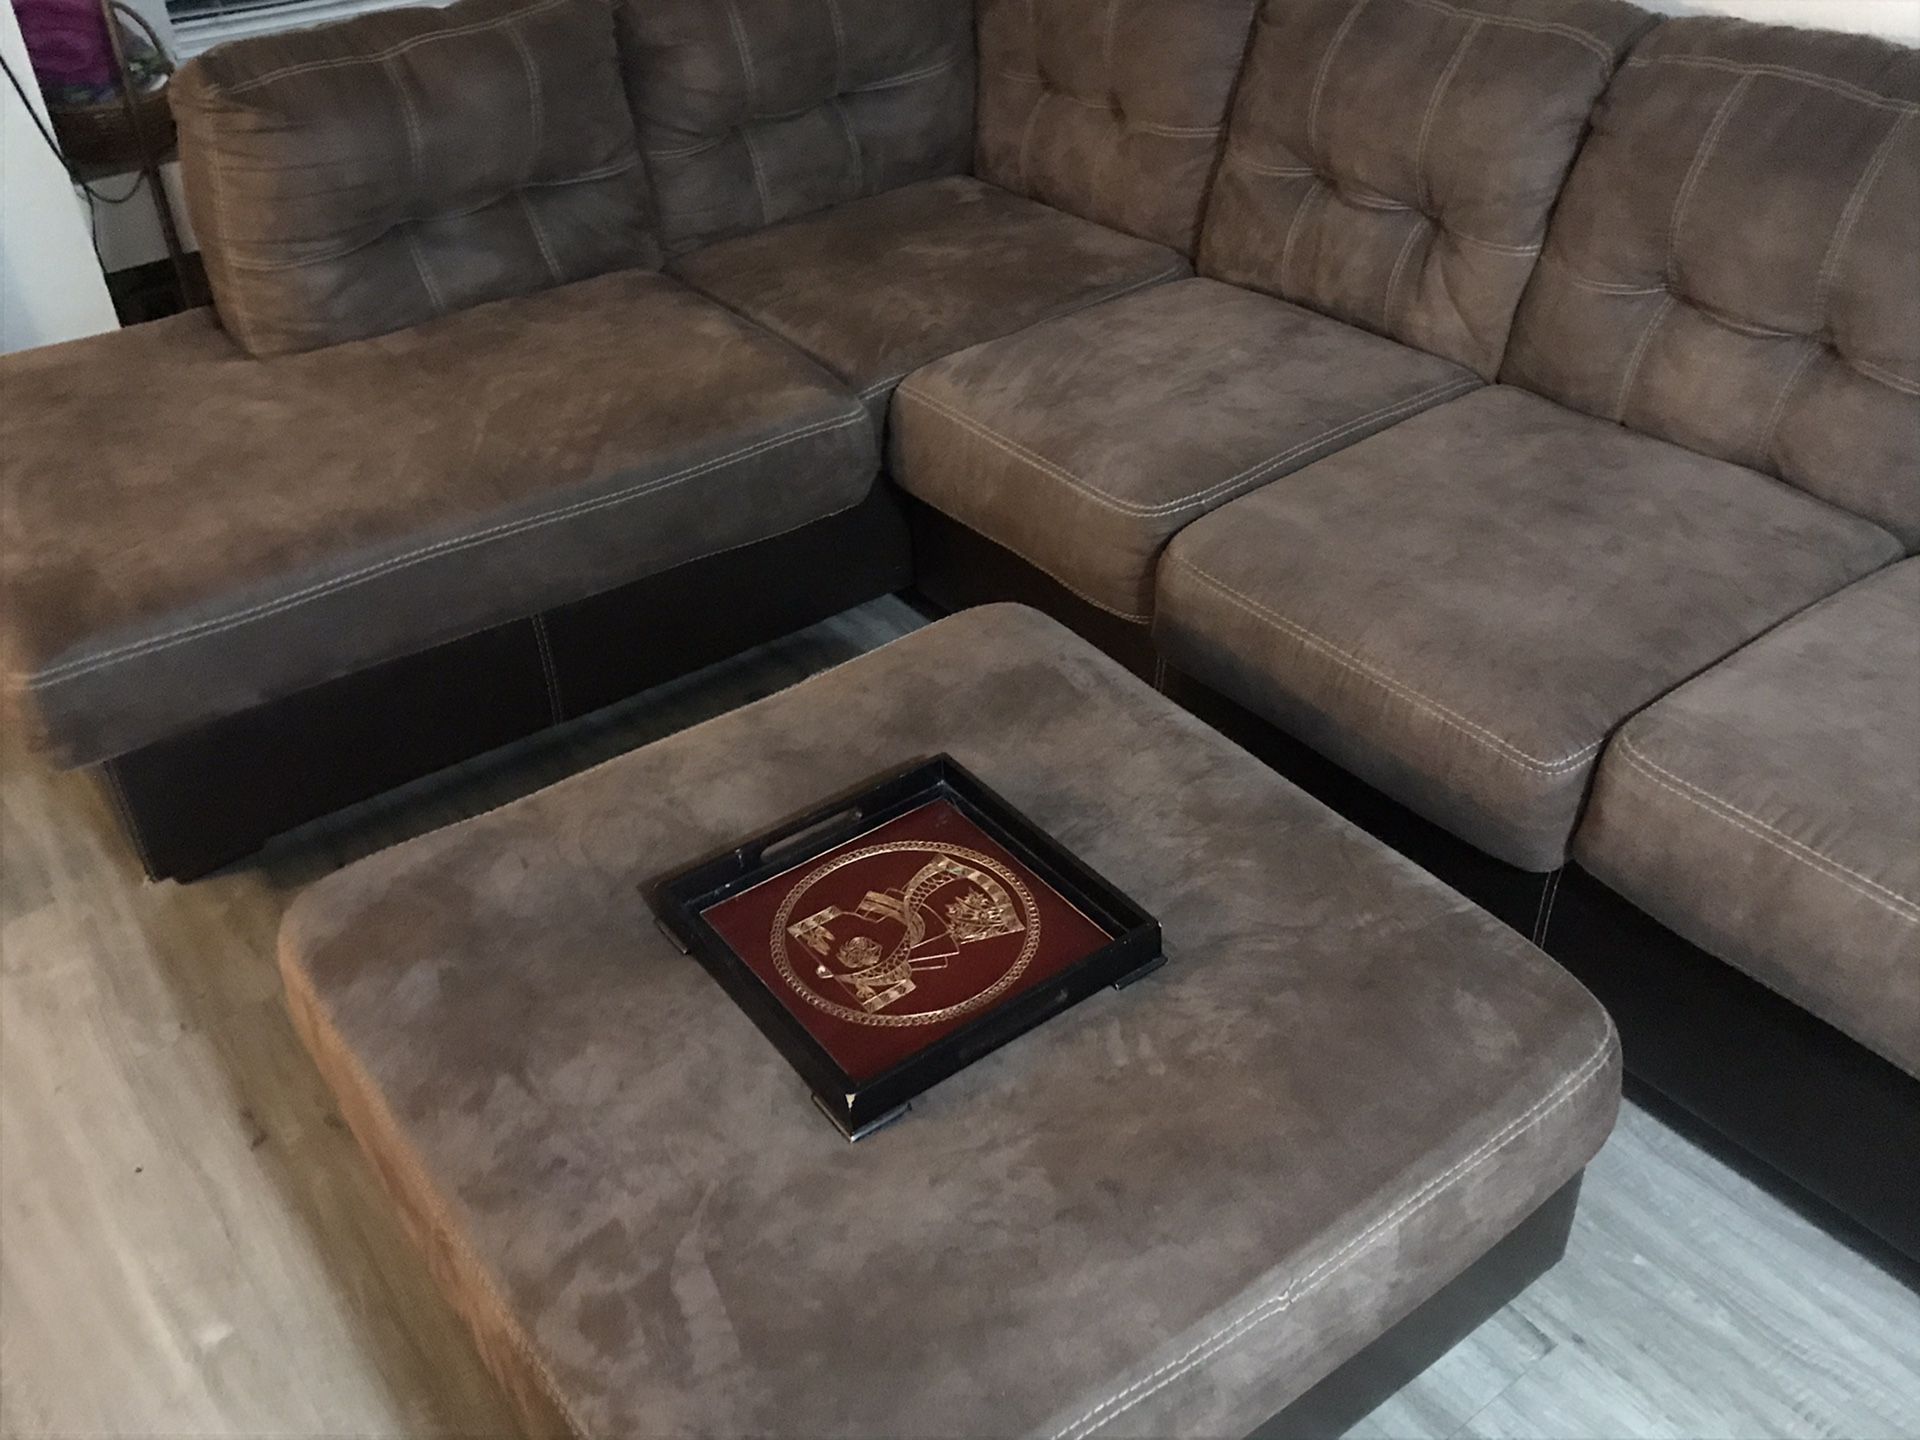 PENDING pickup ****HUGE sectional couch